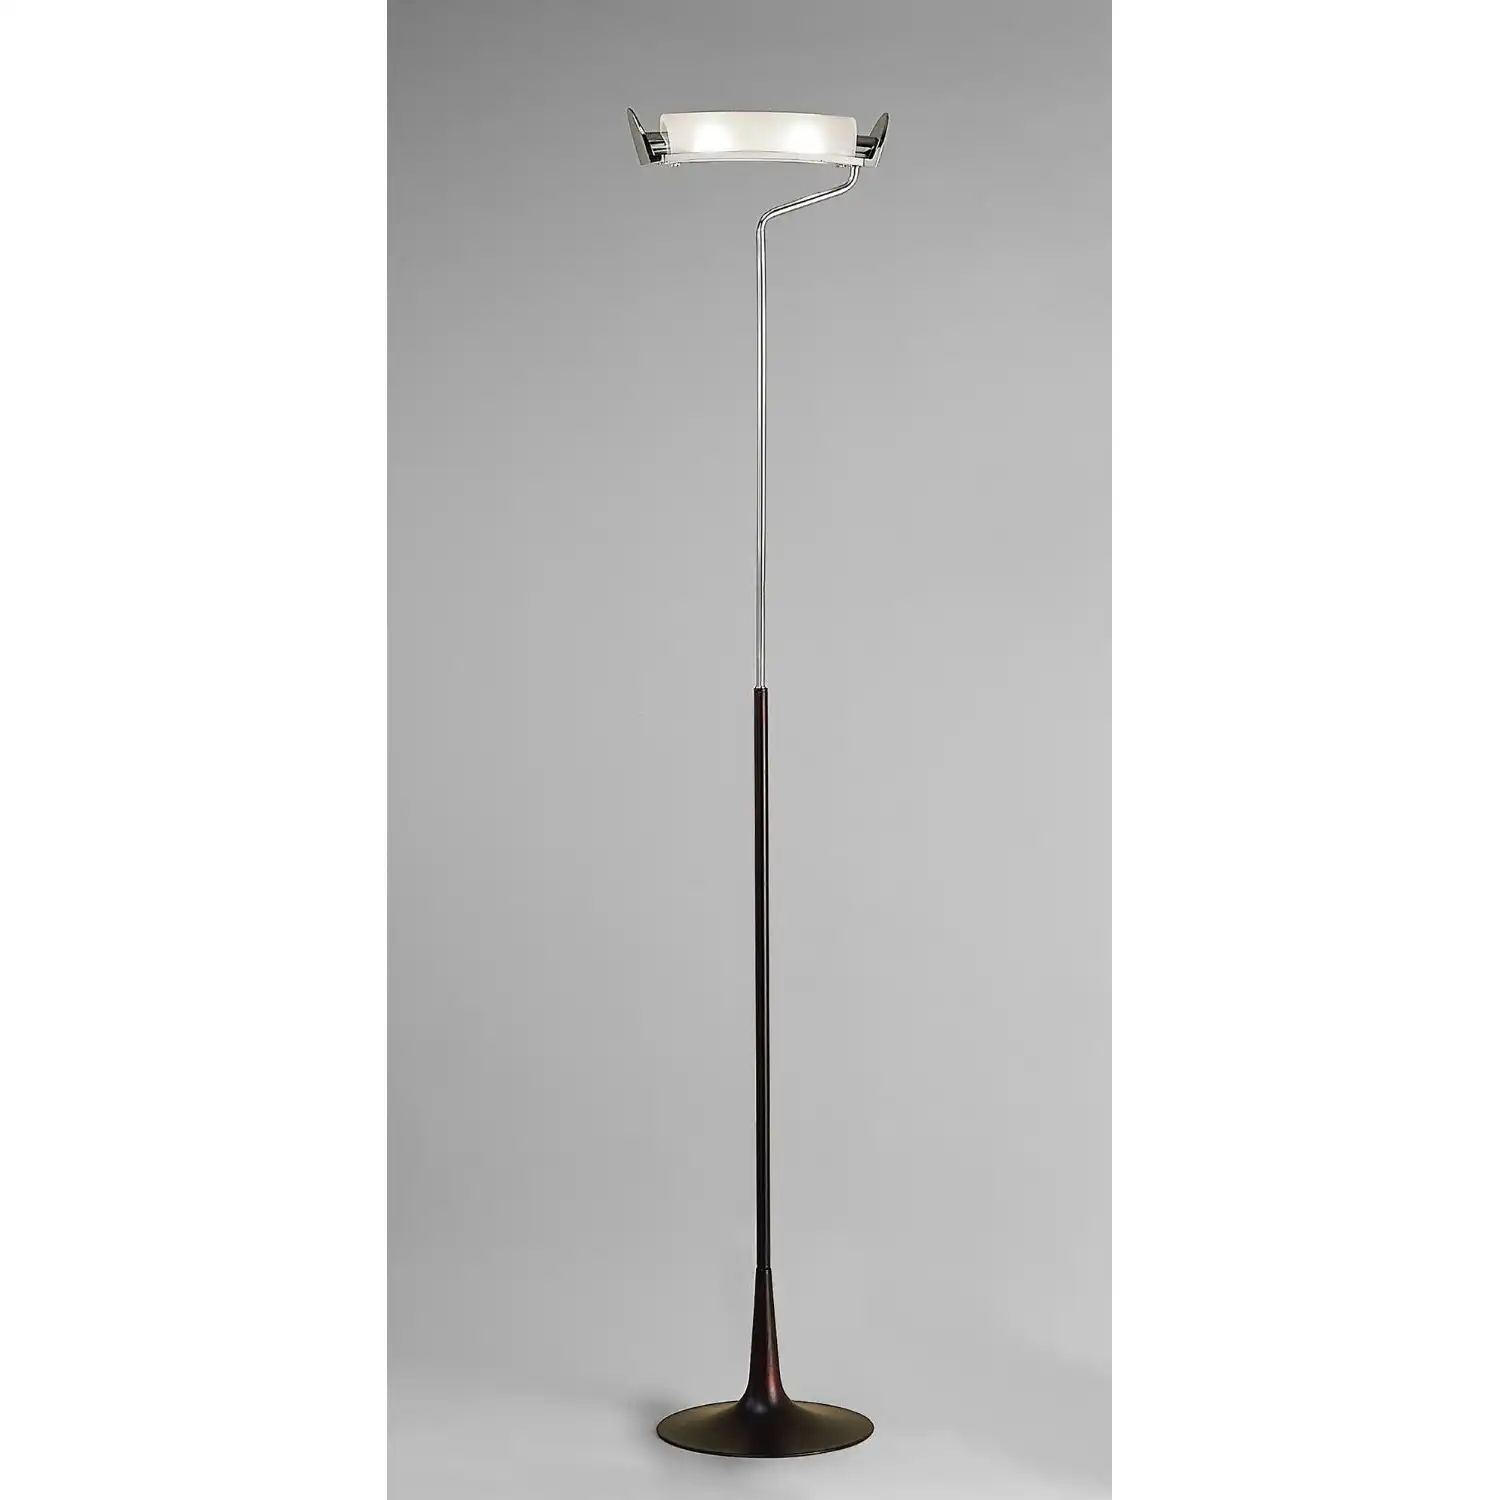 Zira Floor Lamp 2 Light G9, Polished Chrome Frosted White Glass Wenge, NOT LED CFL Compatible